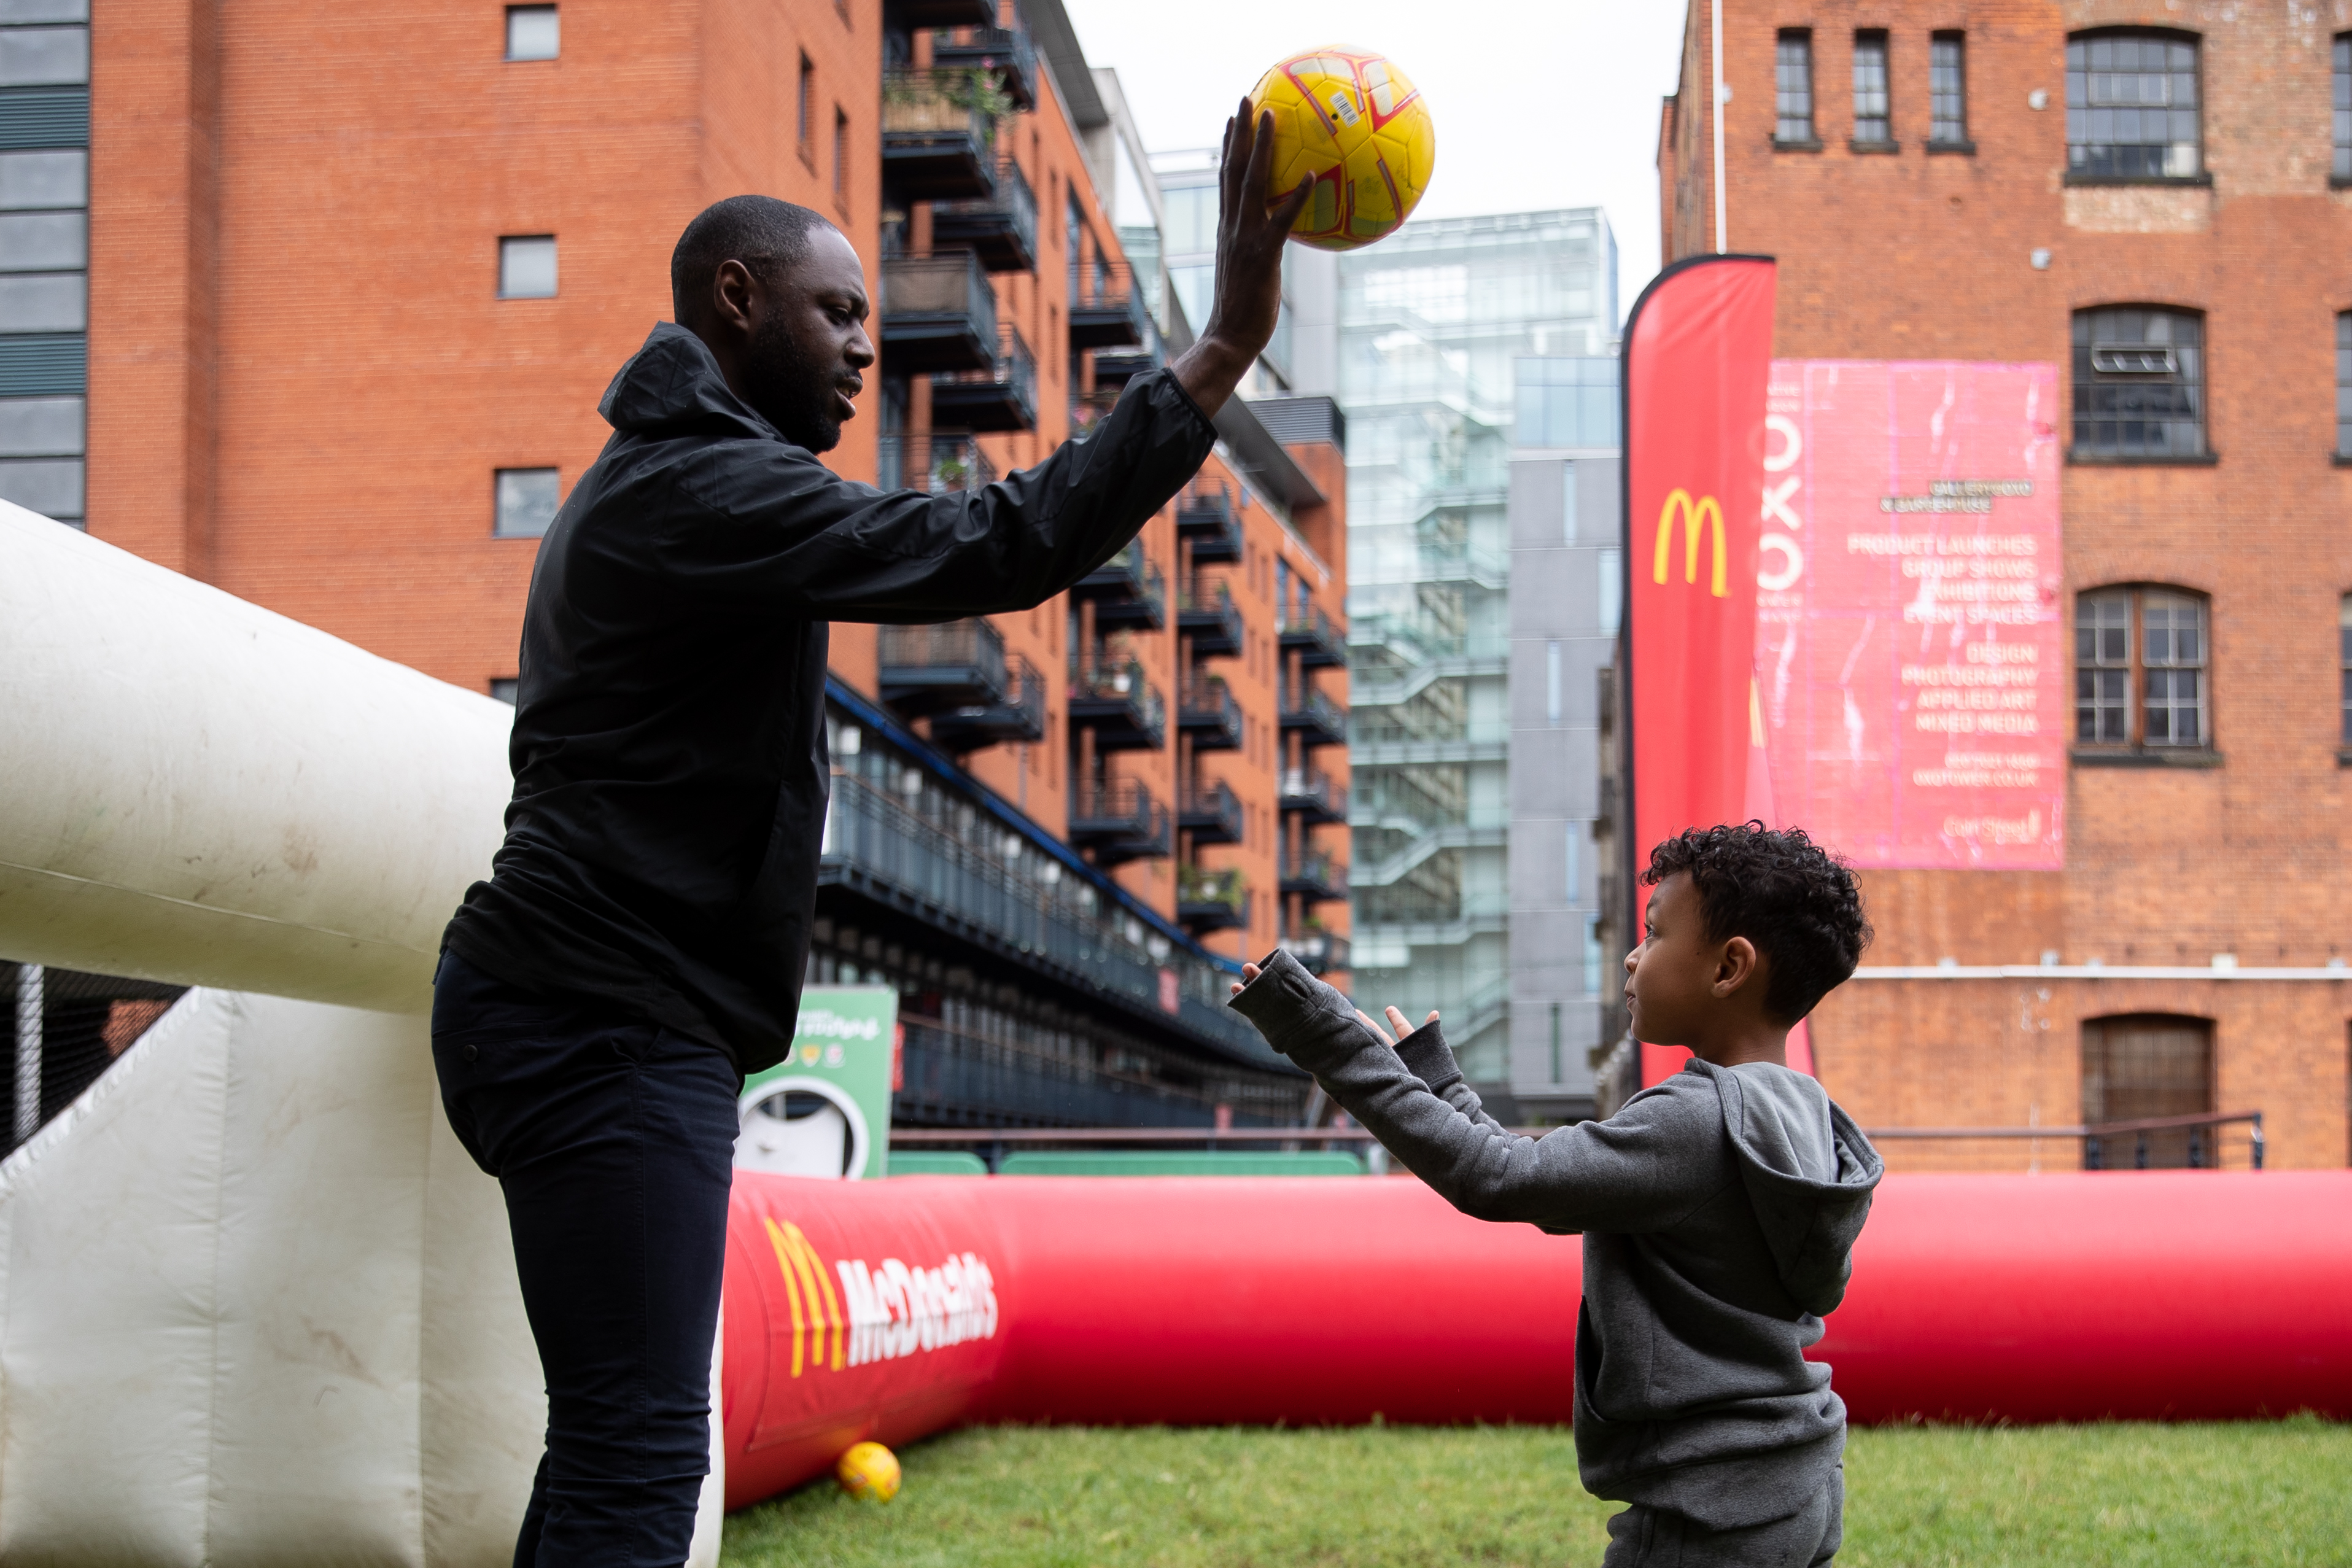 Ledley King attended a McDonald’s Fun Football programme, which is a joint initiative with the FA to give kids aged 5-11 free access to football